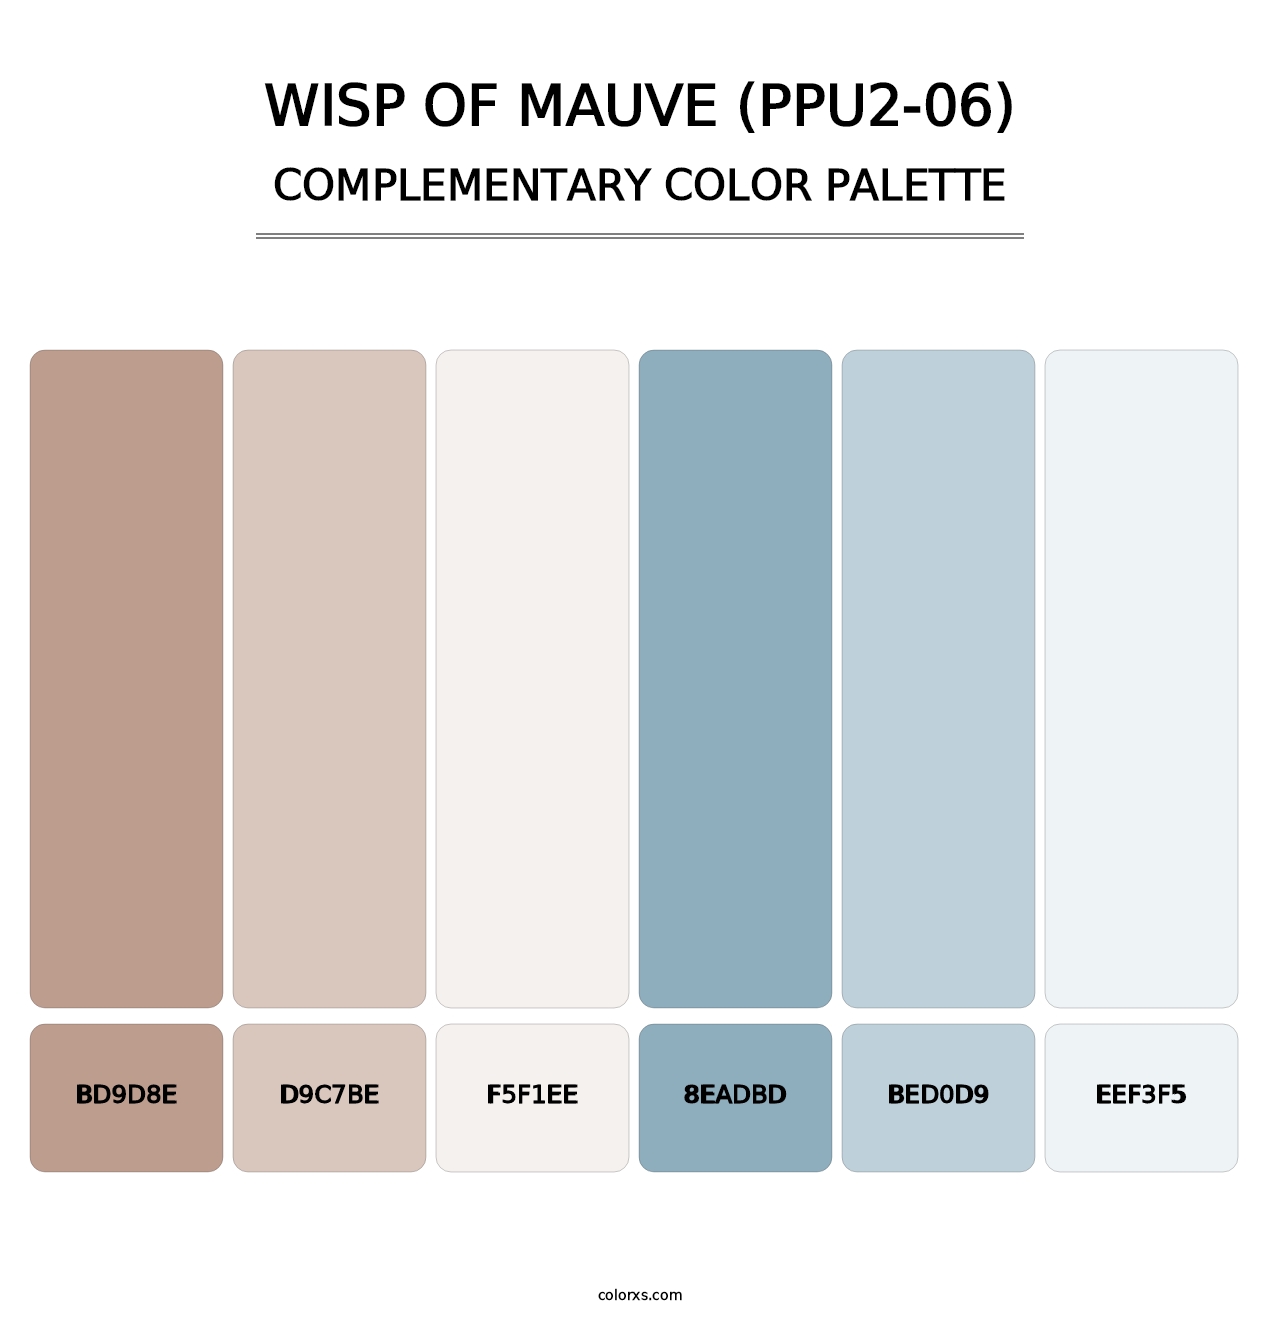 Wisp Of Mauve (PPU2-06) - Complementary Color Palette